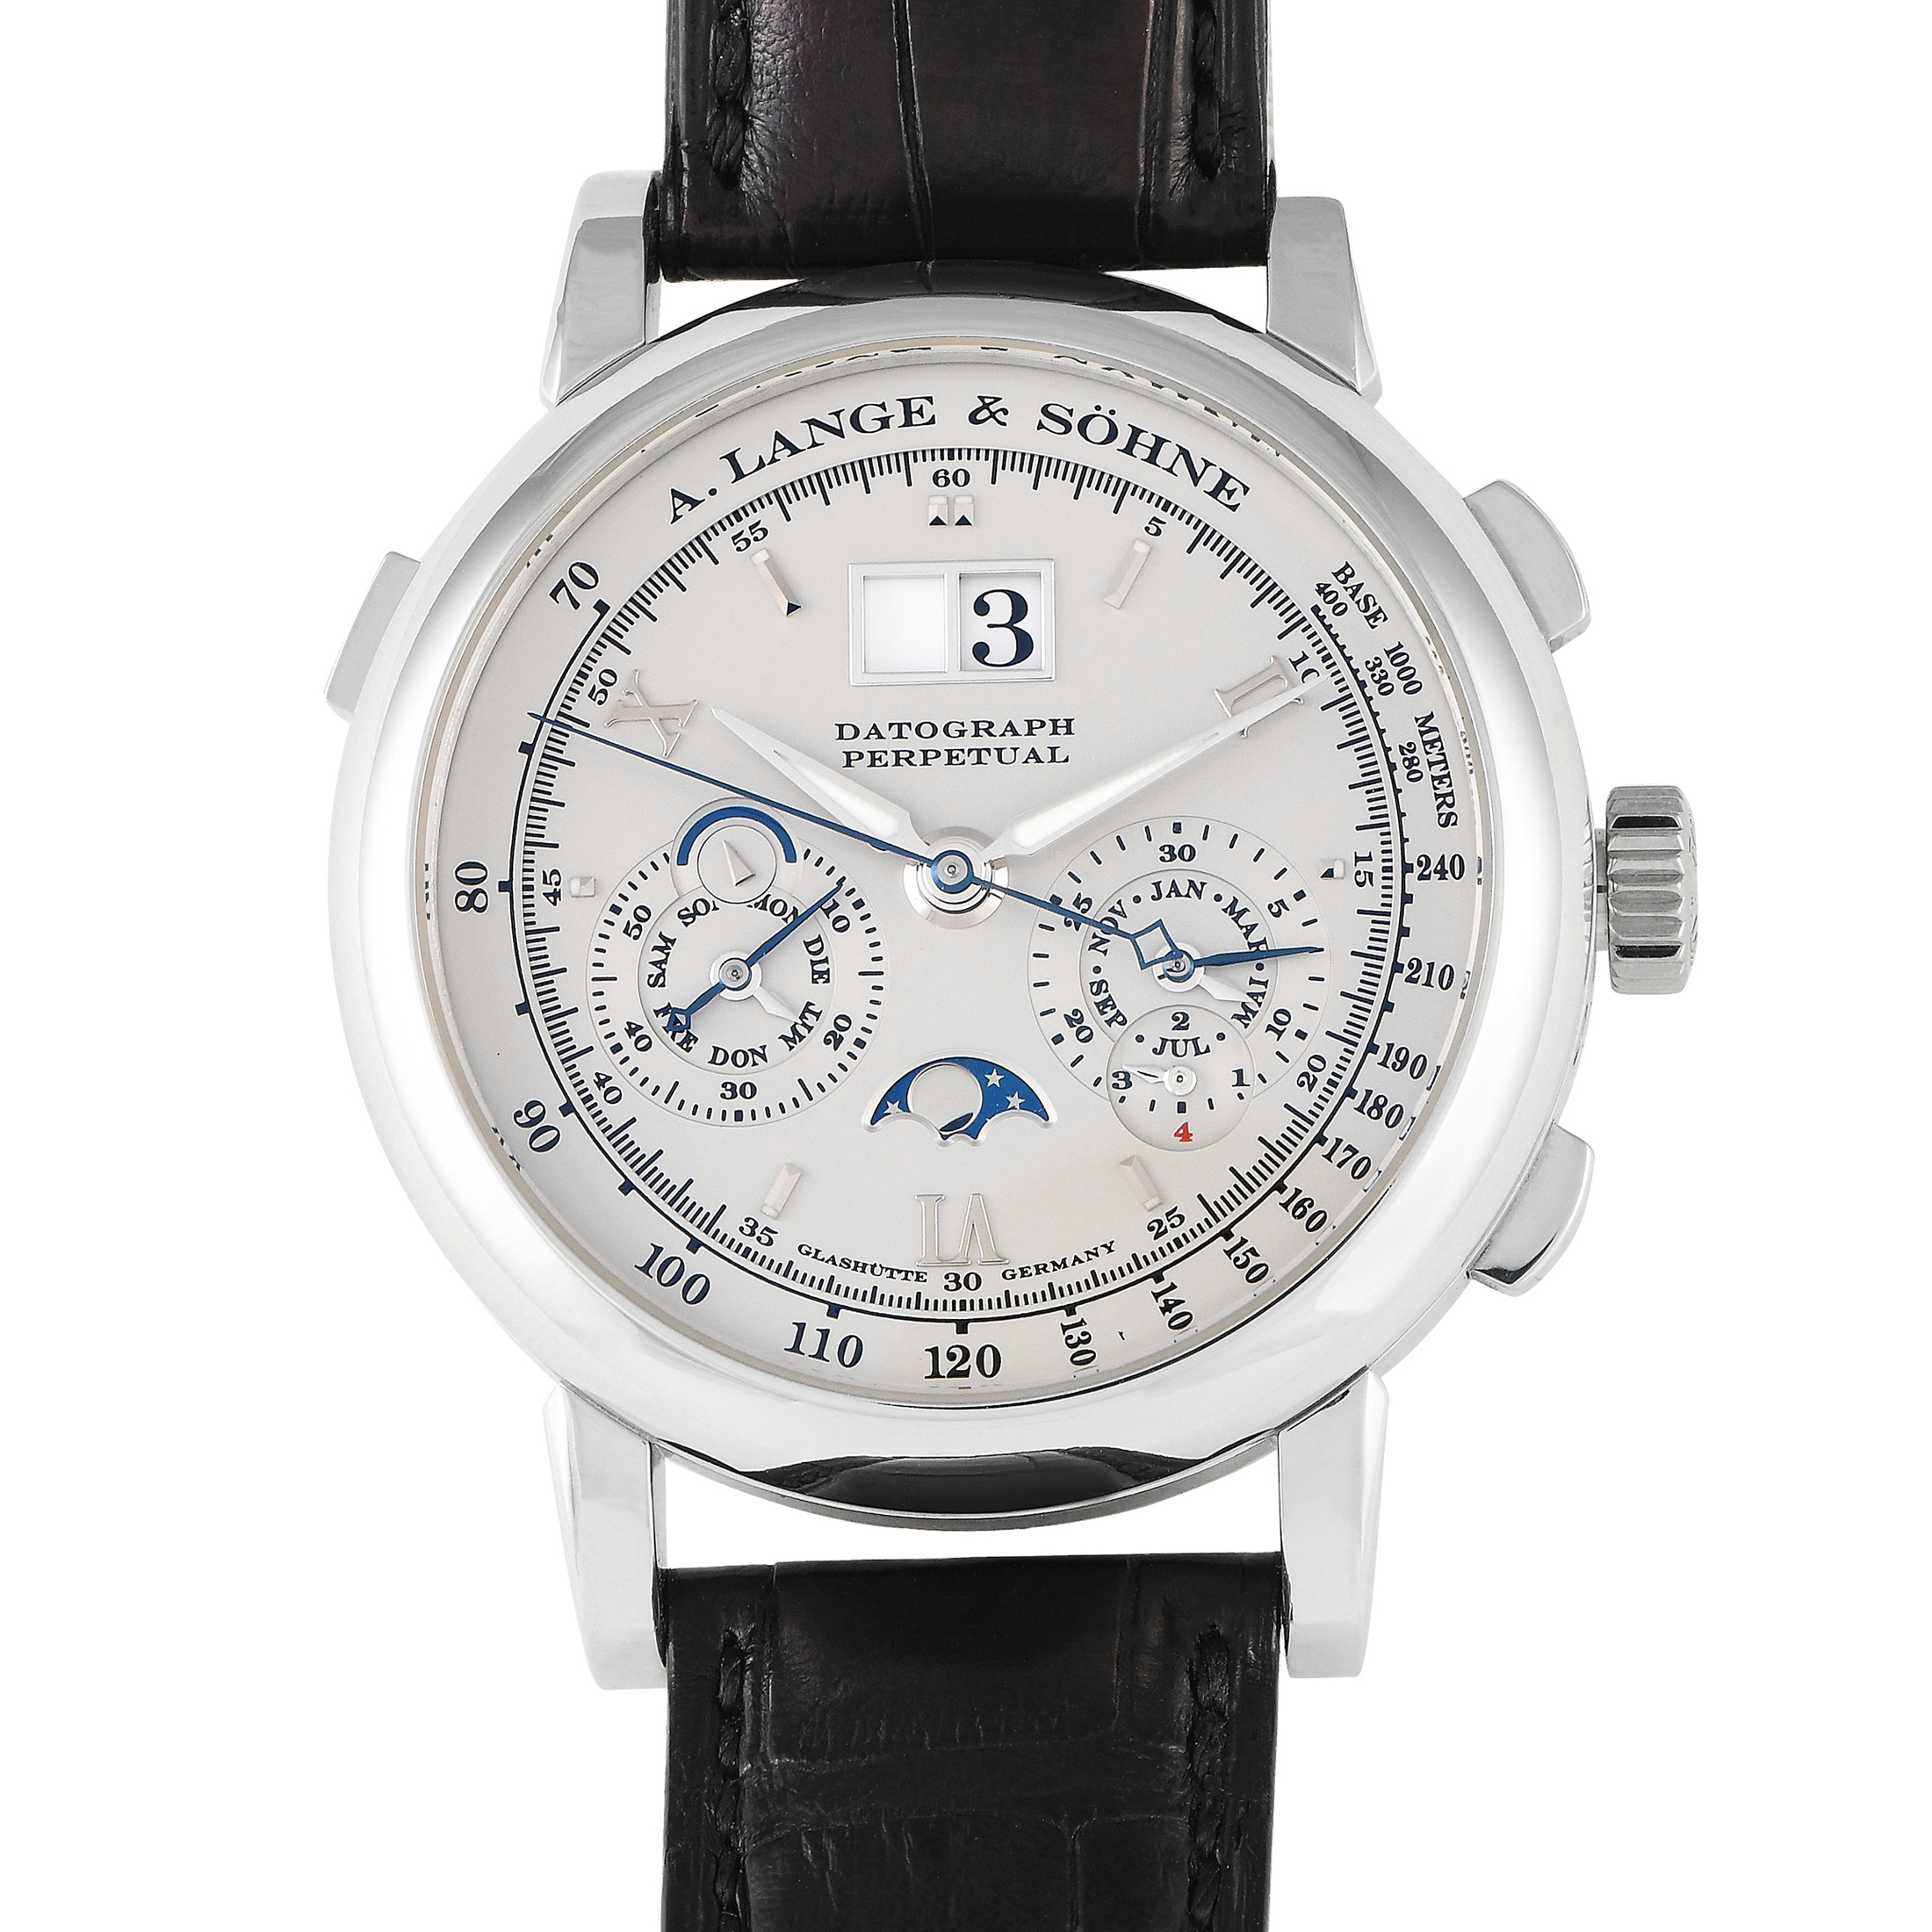 Perpetual Calendar Watch - Definition, Examples, FAQs